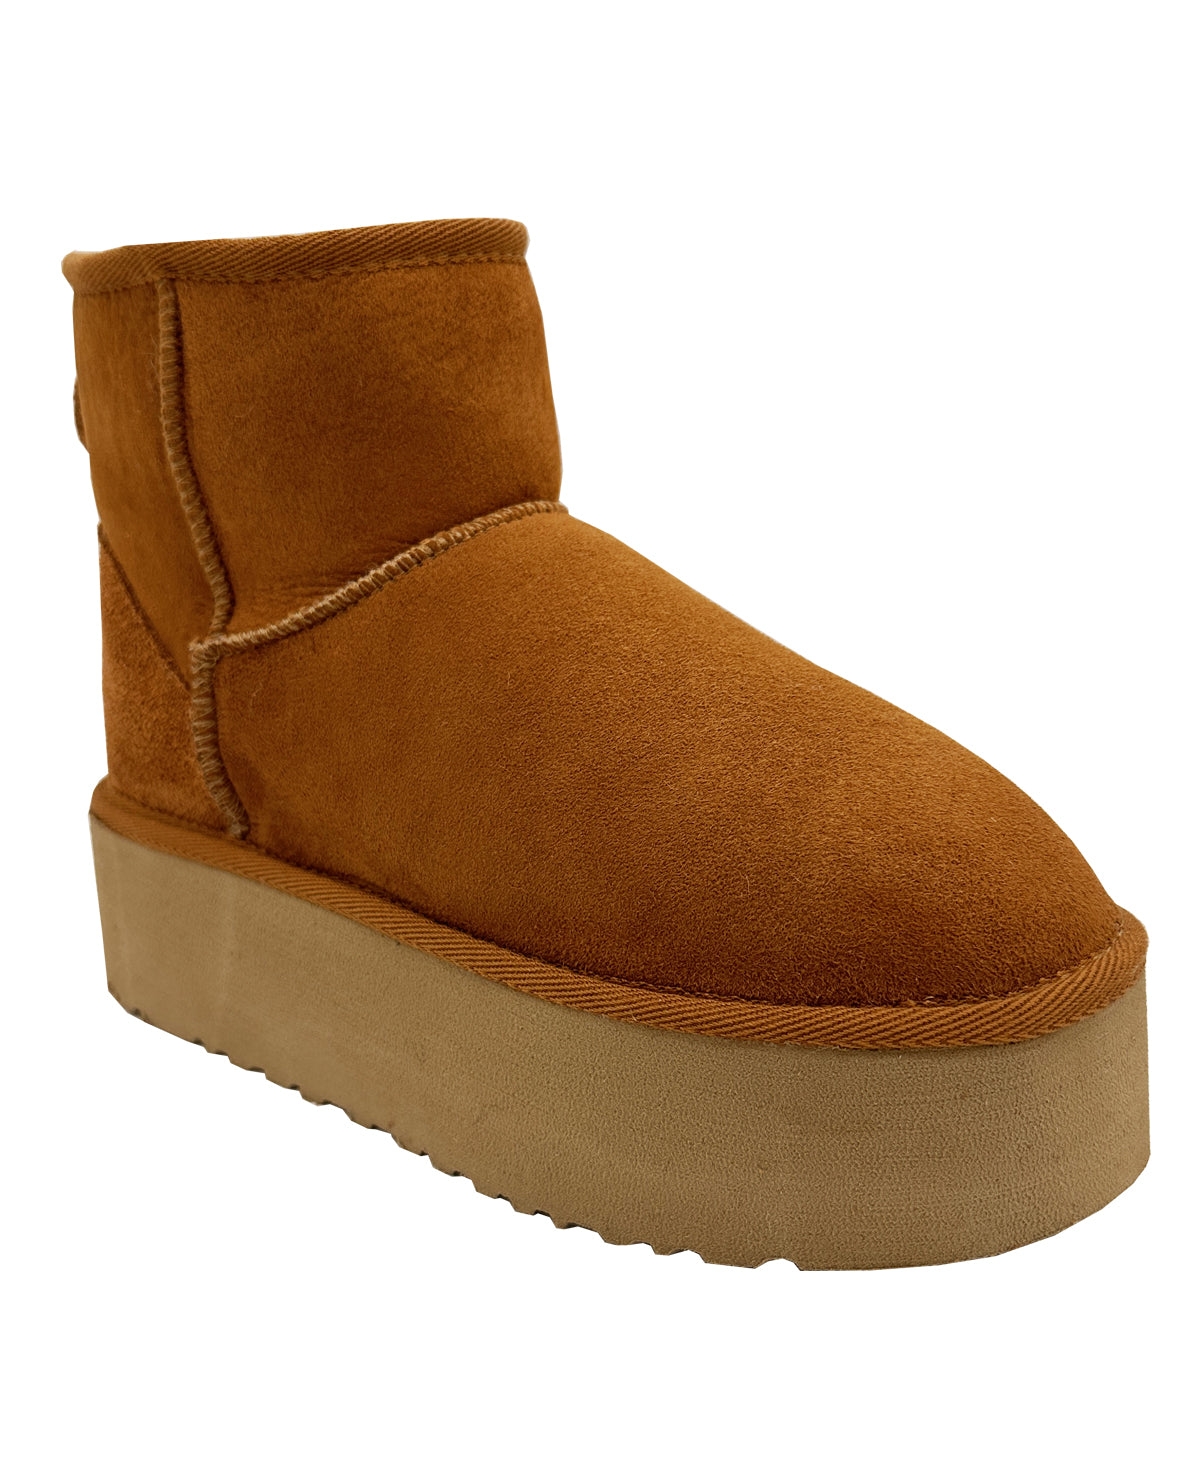 Women's Half Shearling Boots - Whiskey